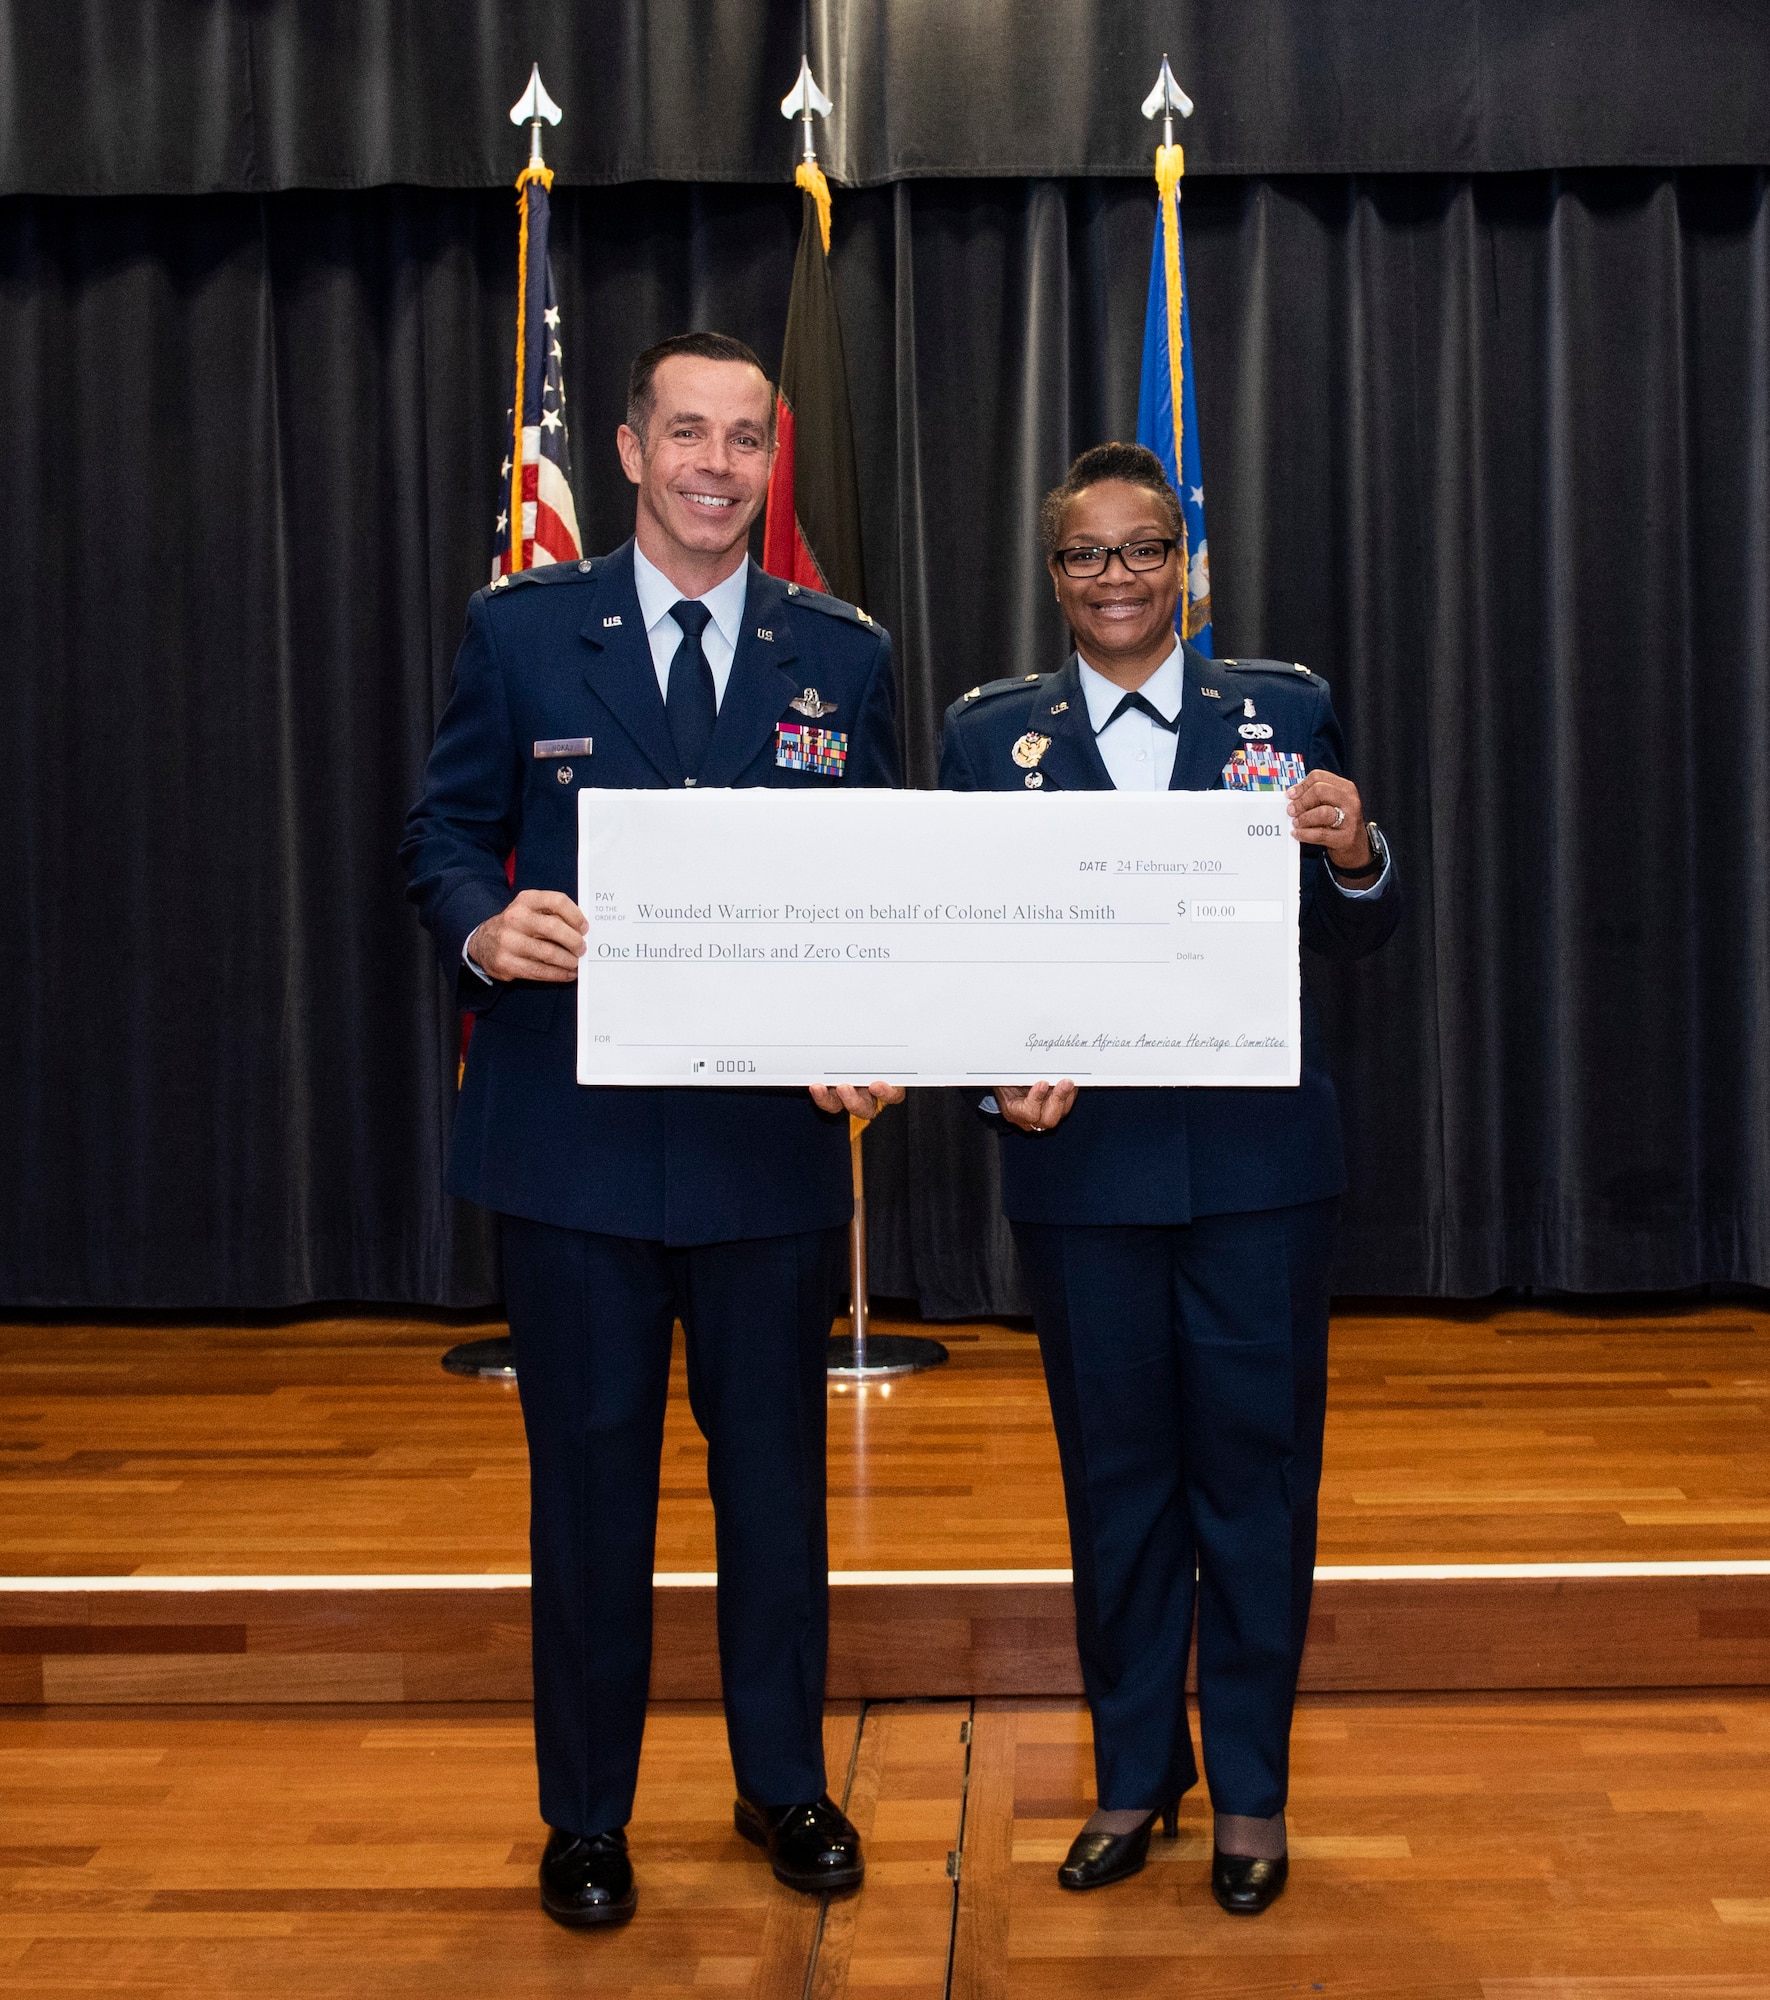 U.S. Air Force Col. Jason Hokaj, 52nd Fighter Wing vice commander, presents U.S. Air Force Col. Alisha Smith, 52nd FW Medical Group commander with a 100 dollar donation to the Wounded Warrior Project on her behalf at Spangdahlem Air Base, Germany, Feb. 24, 2020. 
The Wounded Warrior Project is a charity and veterans service organization that offers a variety of programs, services and events for wounded veterans of the military actions following September 11, 2001. (U.S. Air Force photo by Airman 1st Class Alison Stewart)